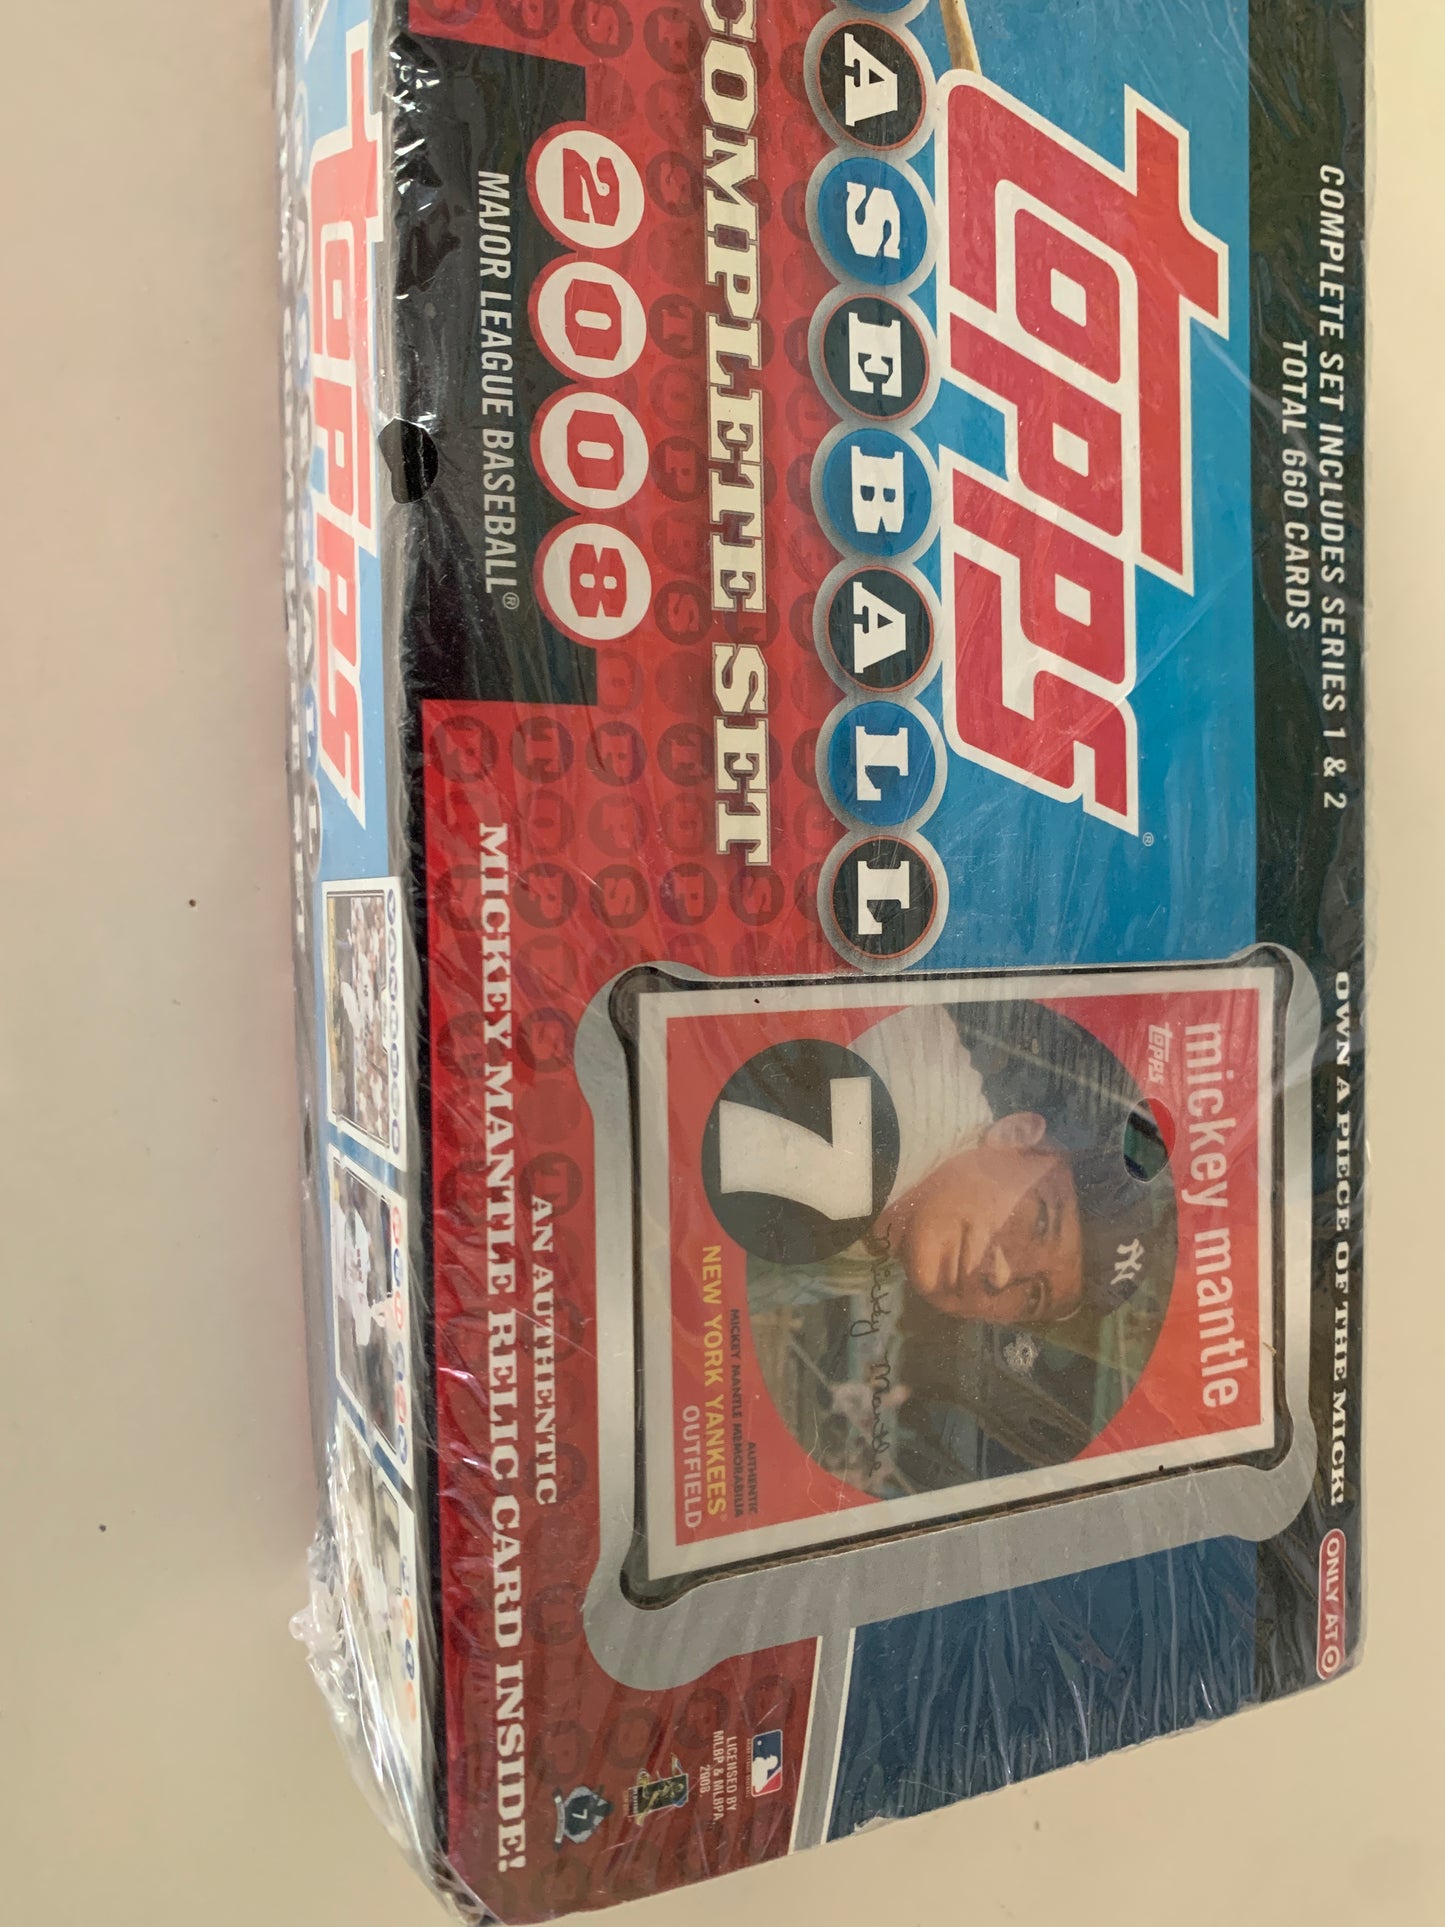 2008 Topps MLB factory sealed Set - and a Mickey Mantle Relic Card